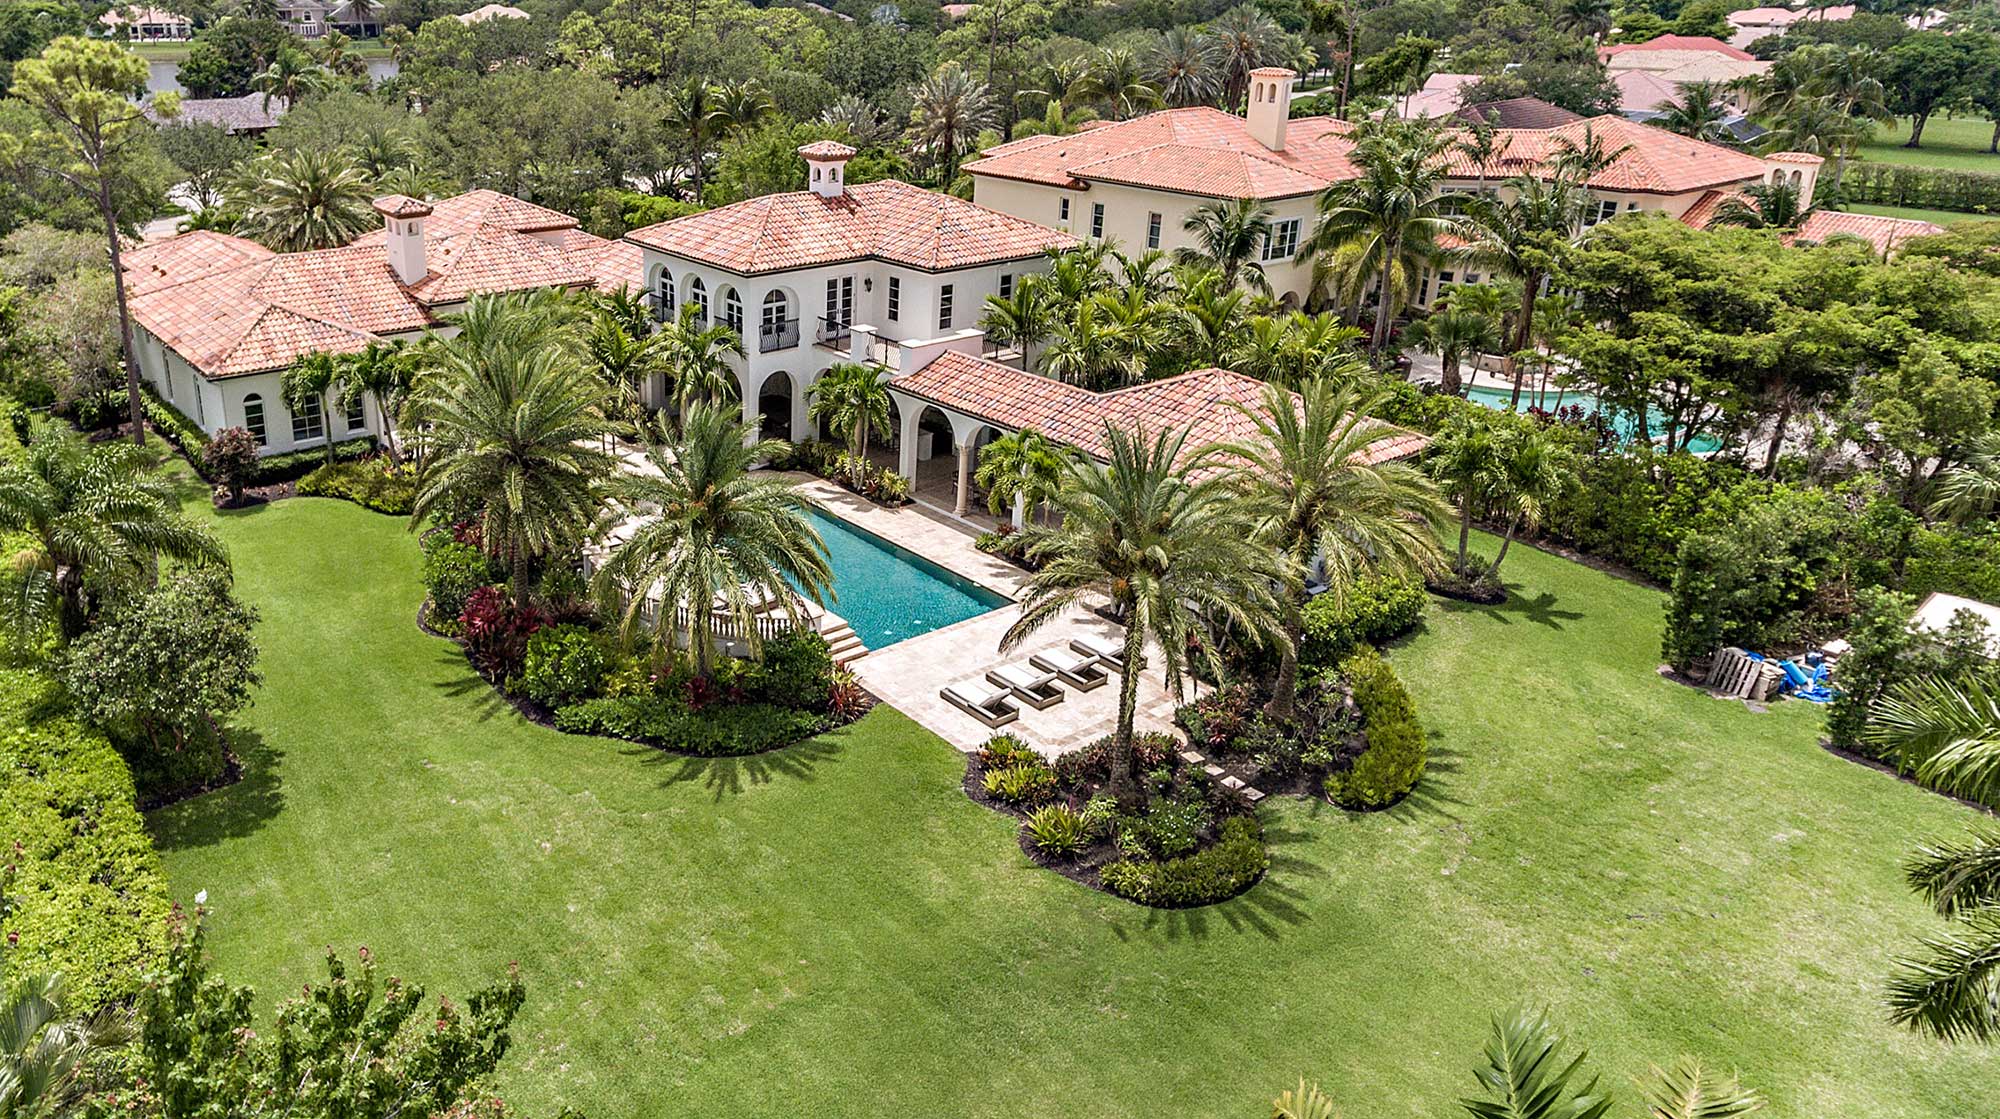 Serena Williams Quietly Sells Home in Palm Beach Gardens, Florida - Mansion  Global